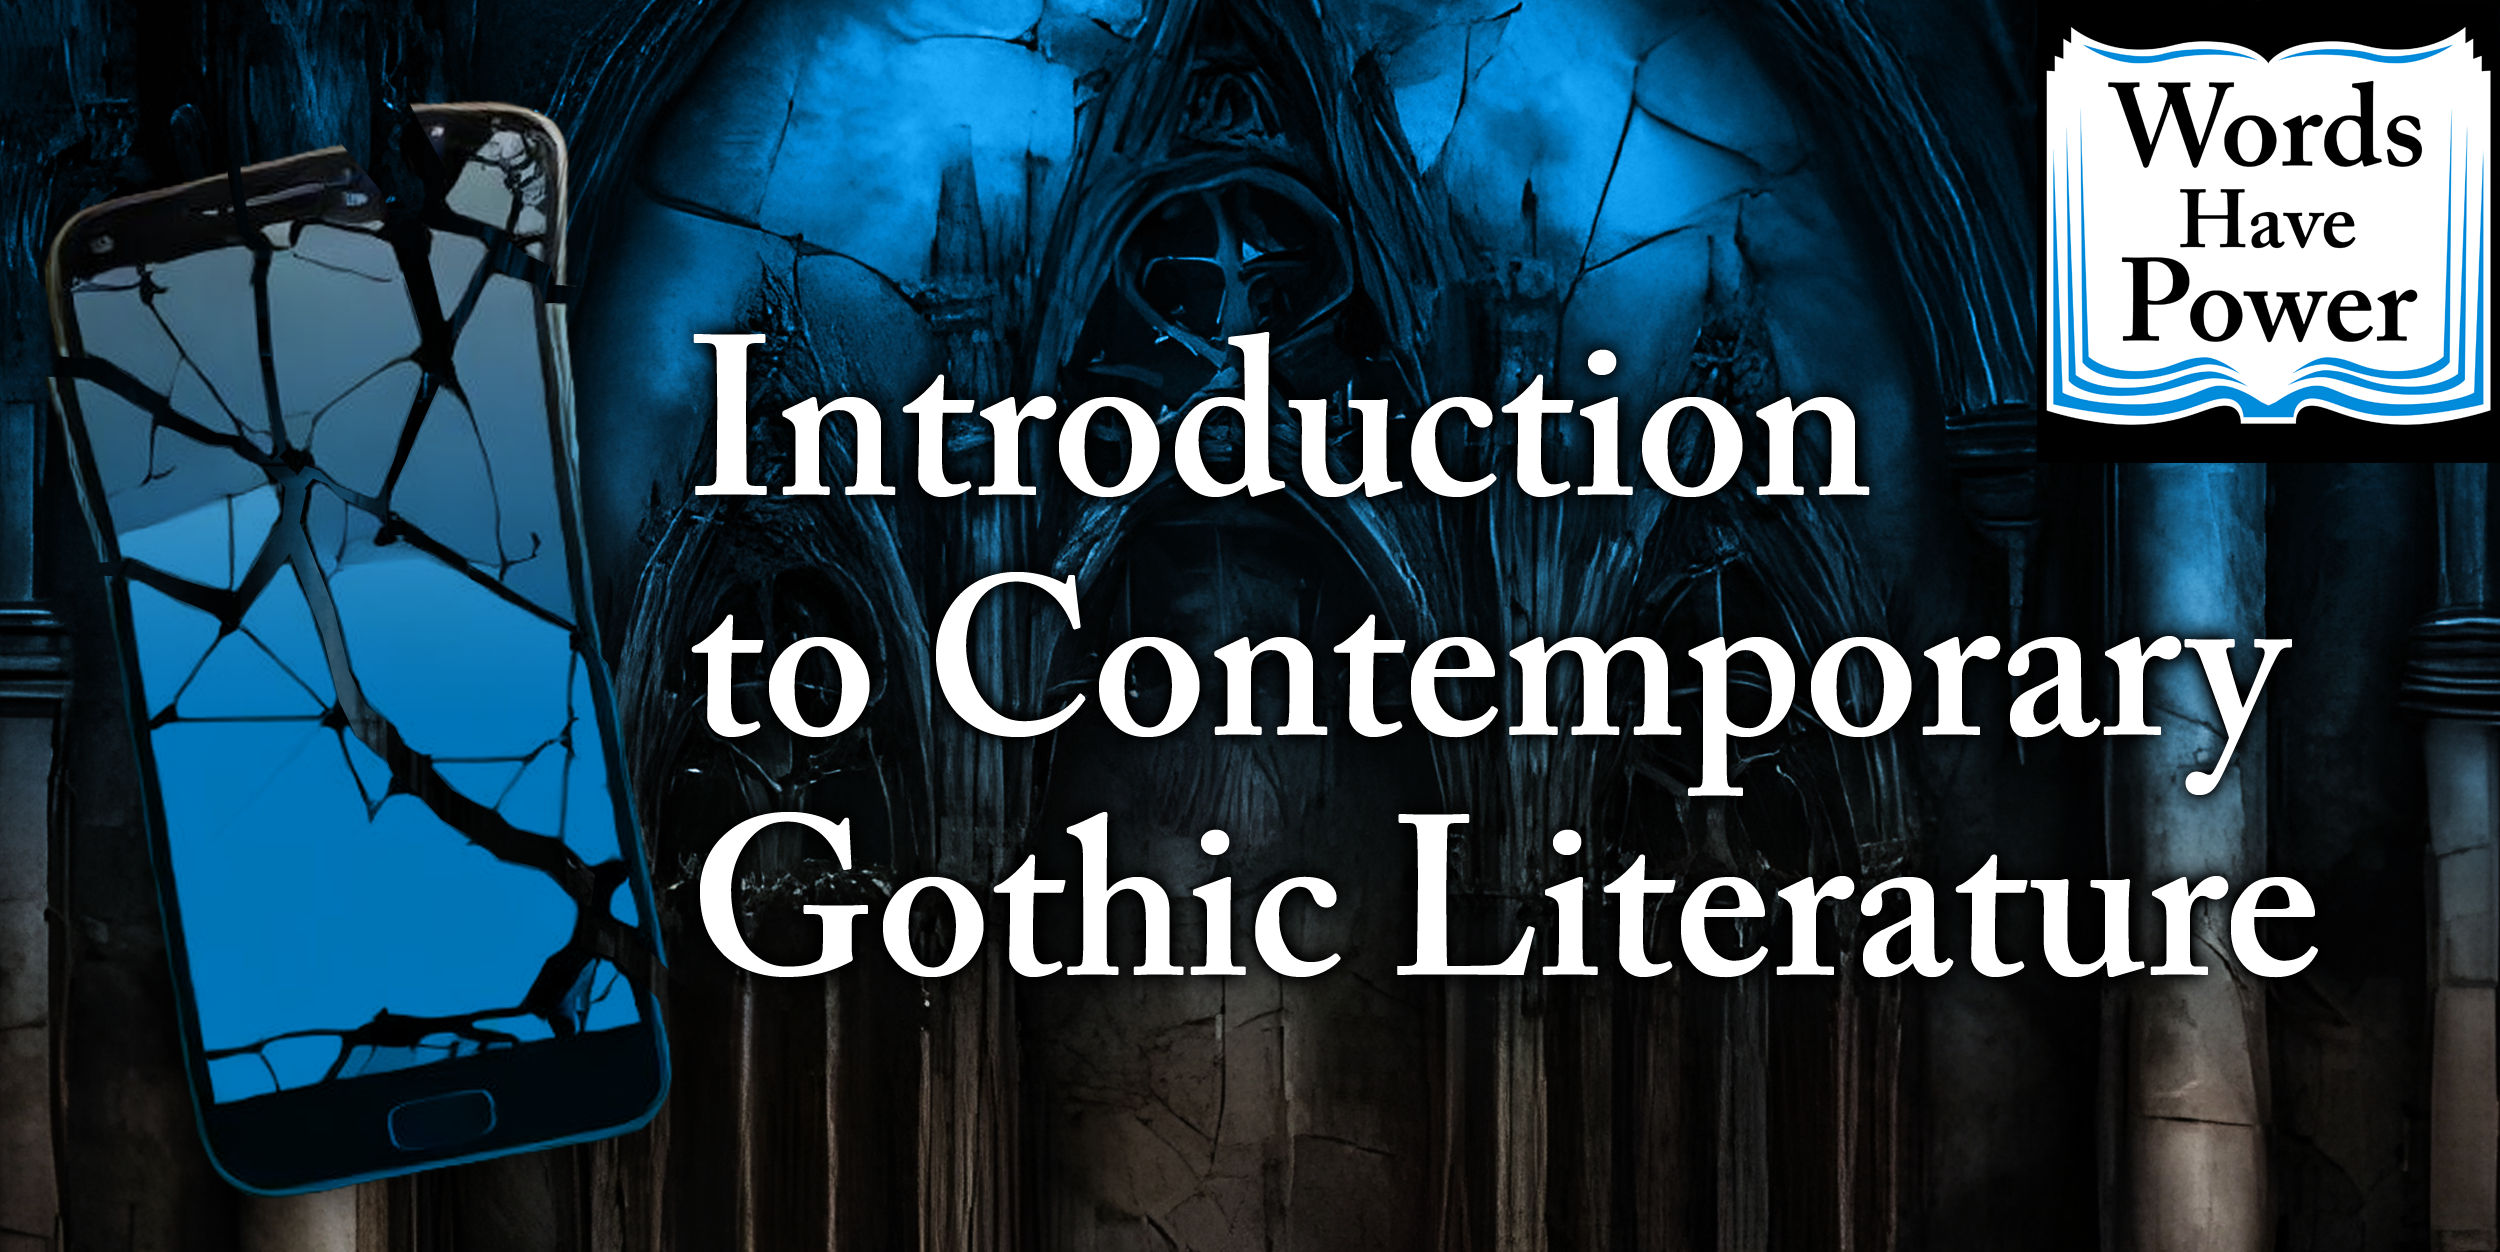 Introduction to Contemporary Gothic - Words Have Power